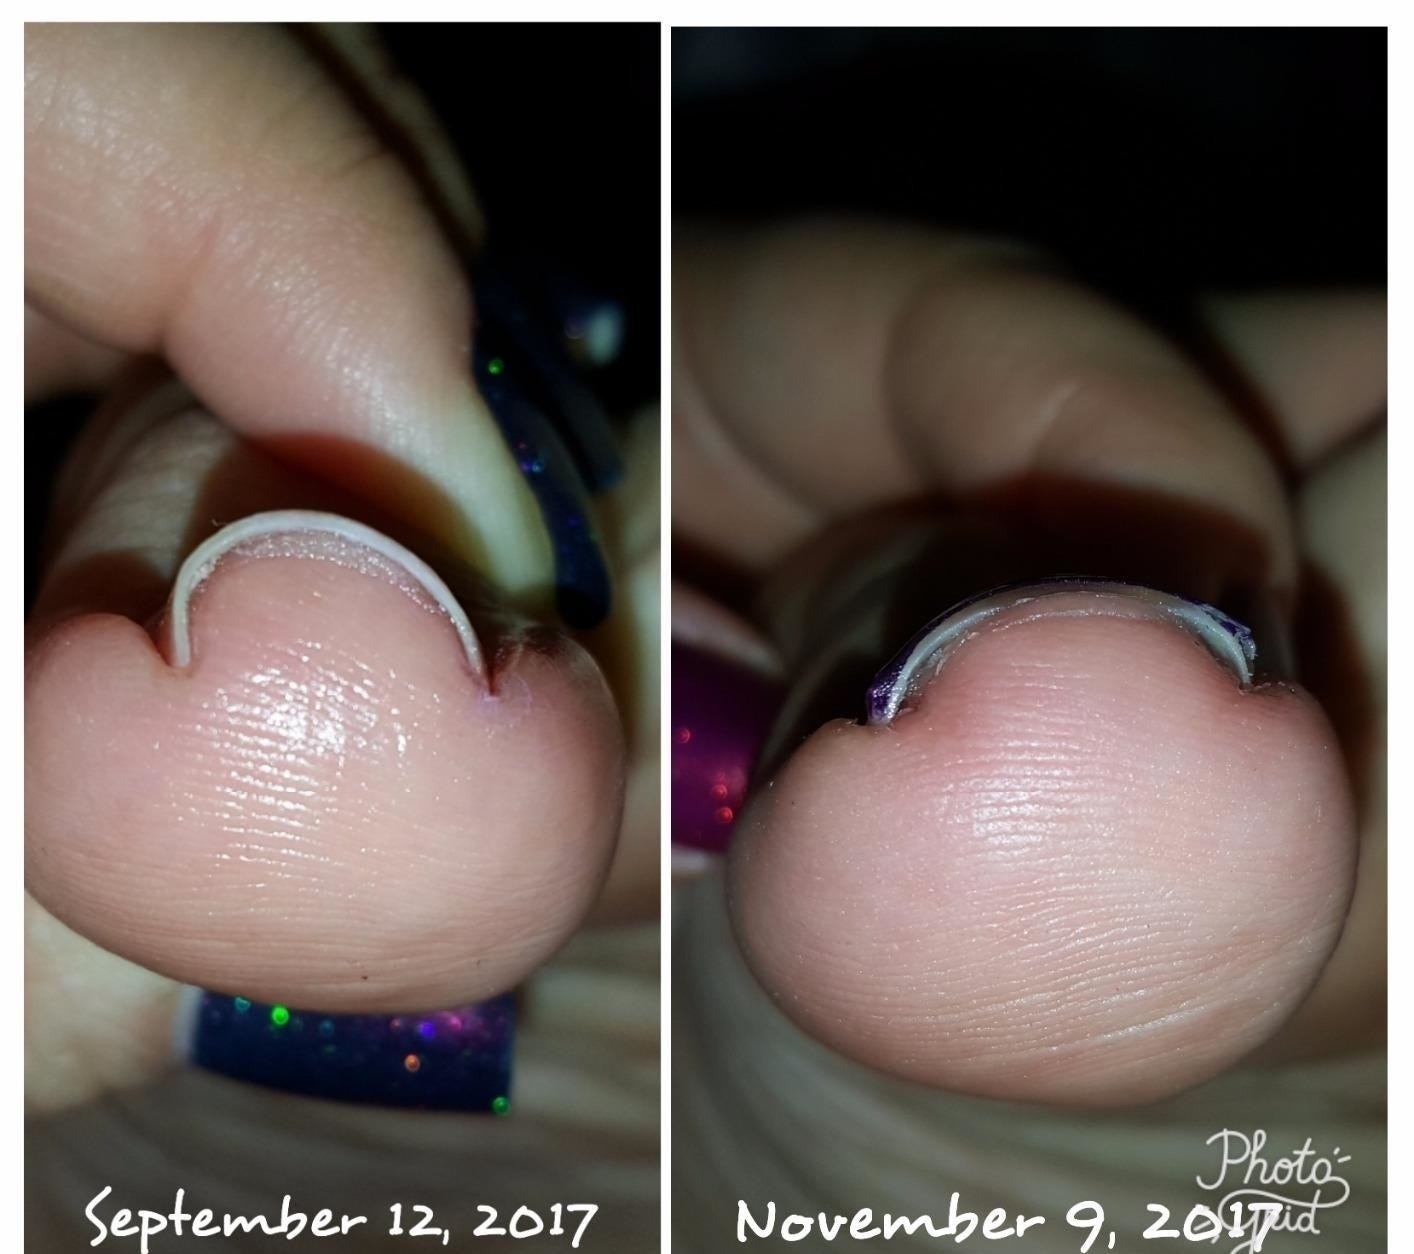 On the left: a reviewer&#x27;s ingrown toenail on September 12, 2017; on the right: the toenail much much, much less ingrown on November 9, 2017